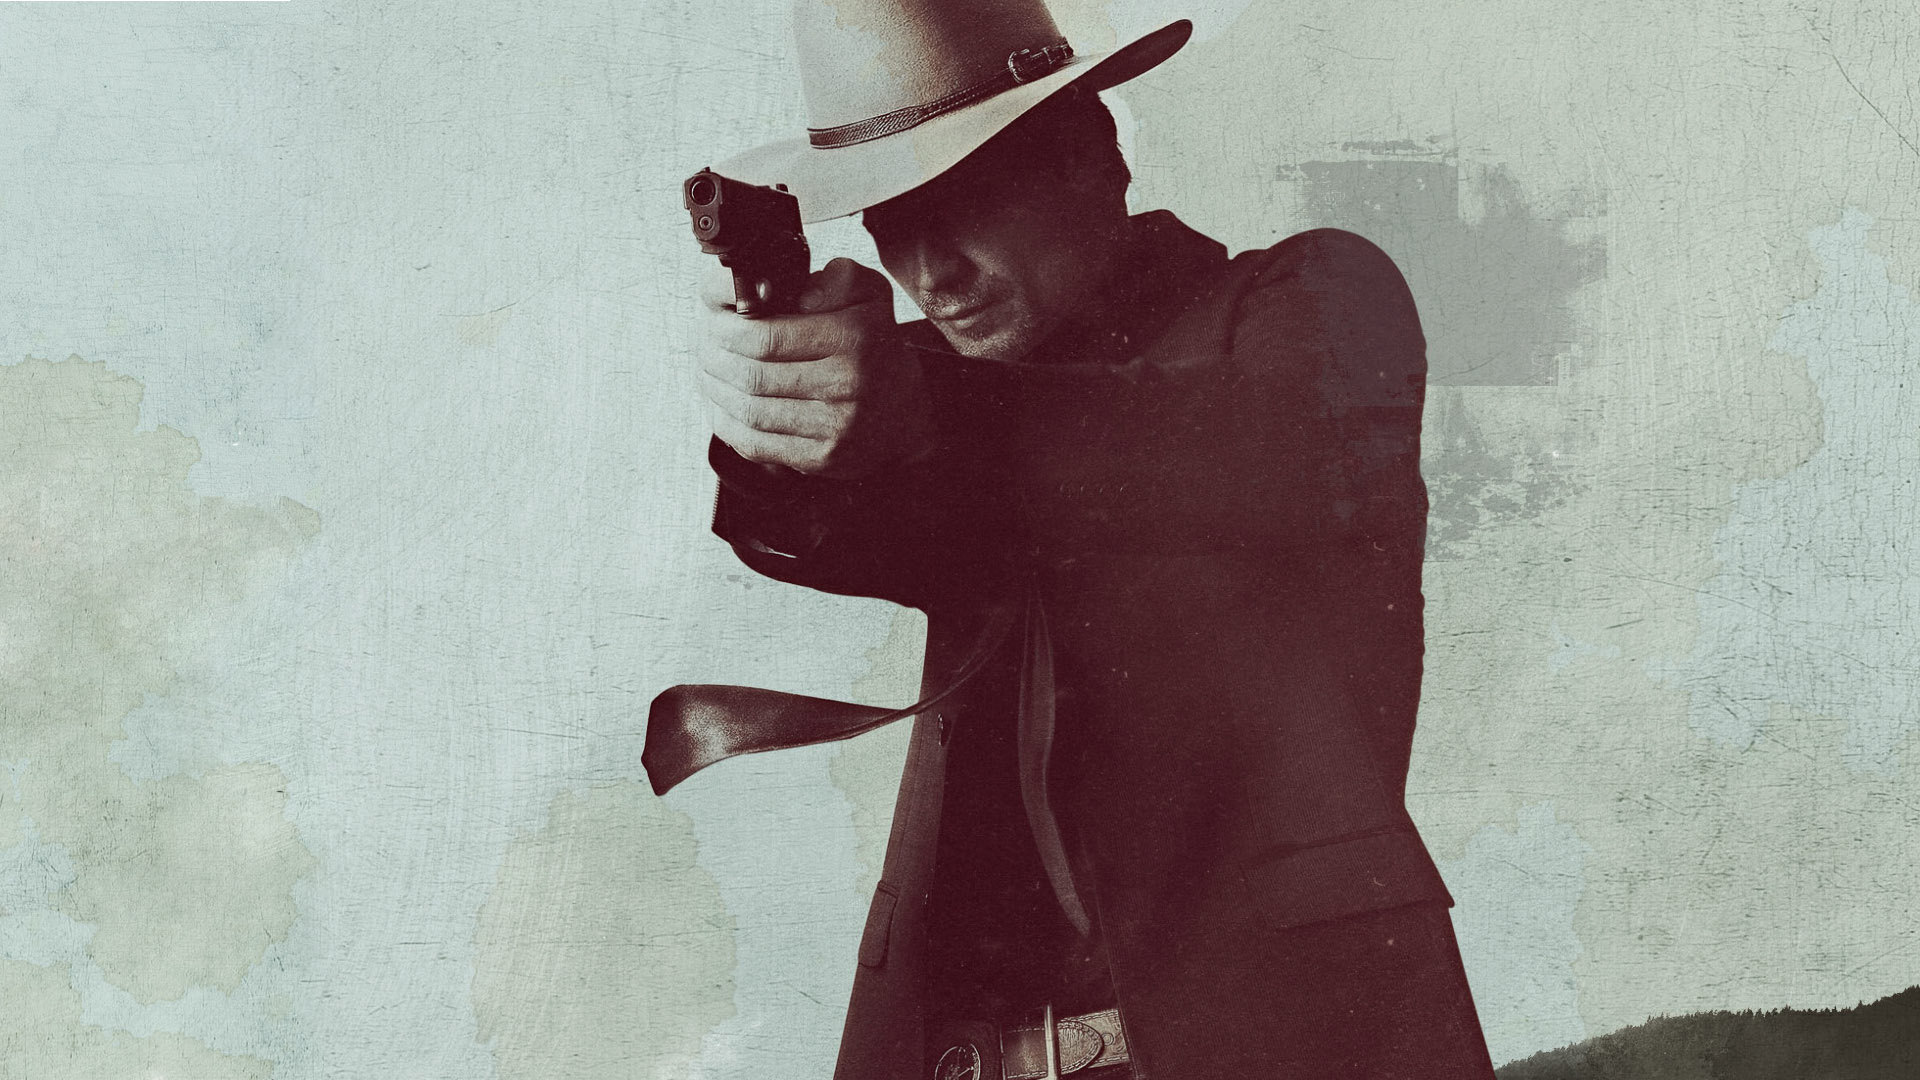 tv show, justified, timothy olyphant